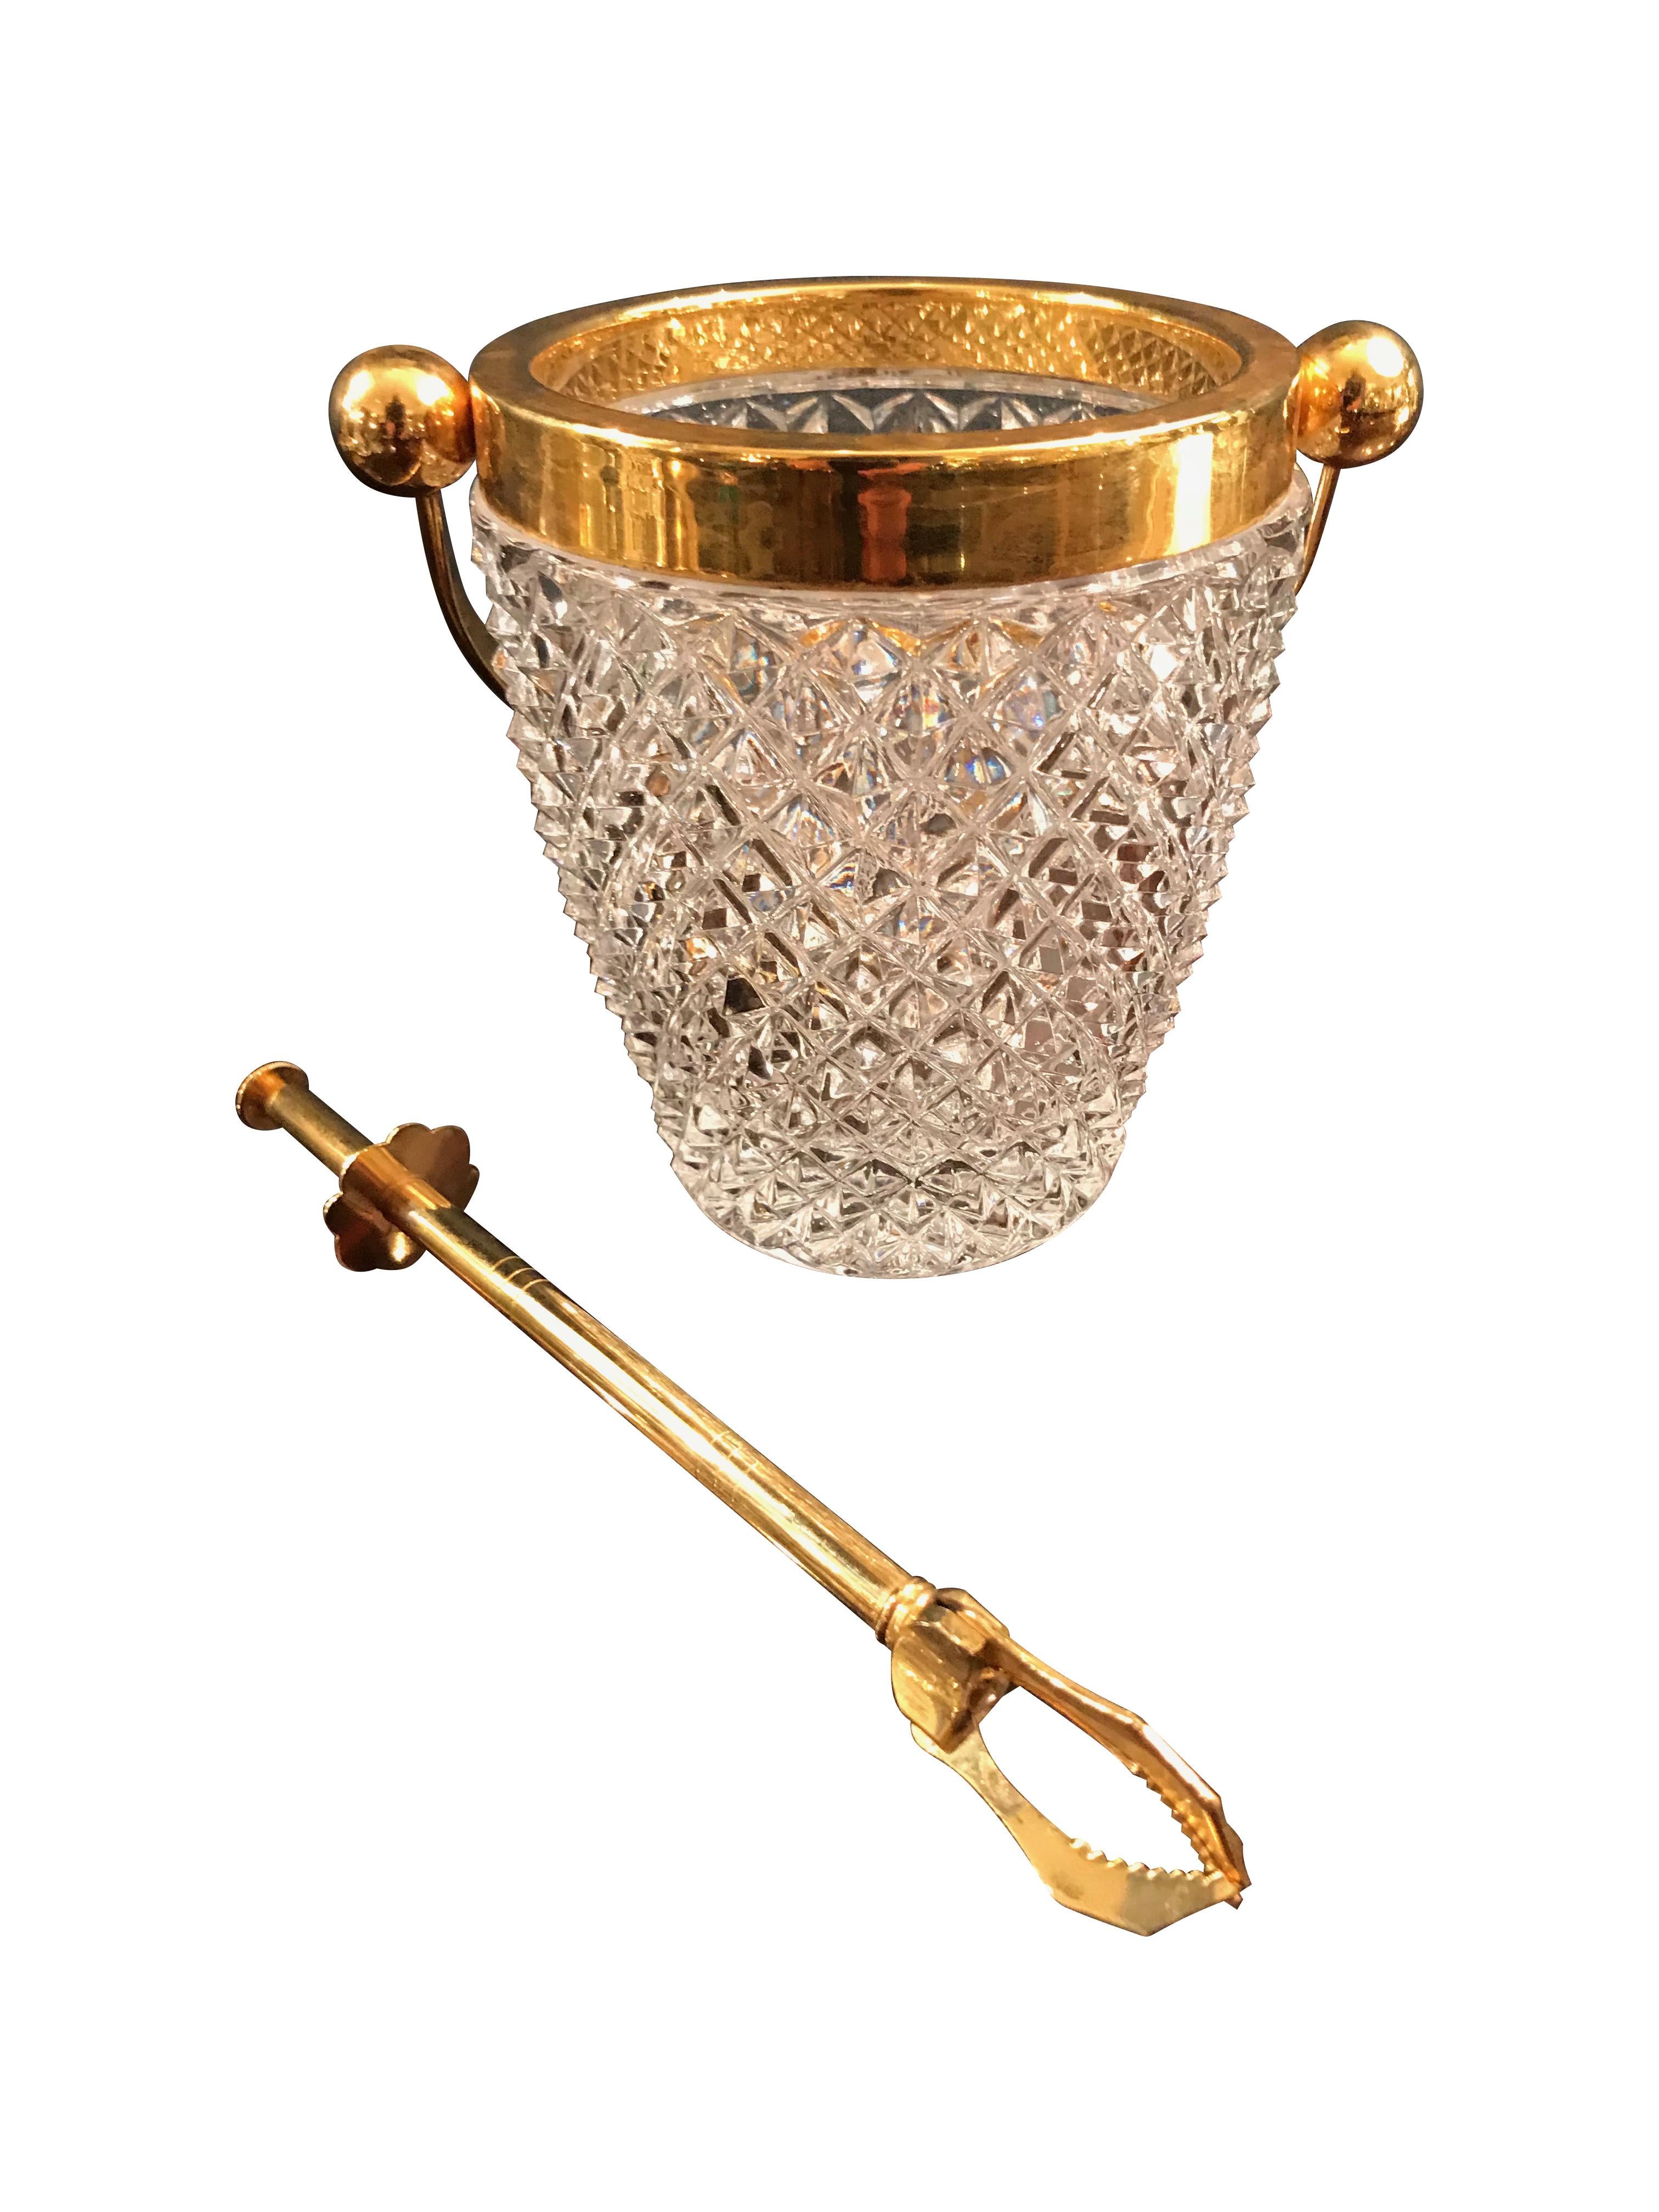 A Val St Lambert crystal ice bucket with gold plated rim and handle, with gilt metal ice grabber.